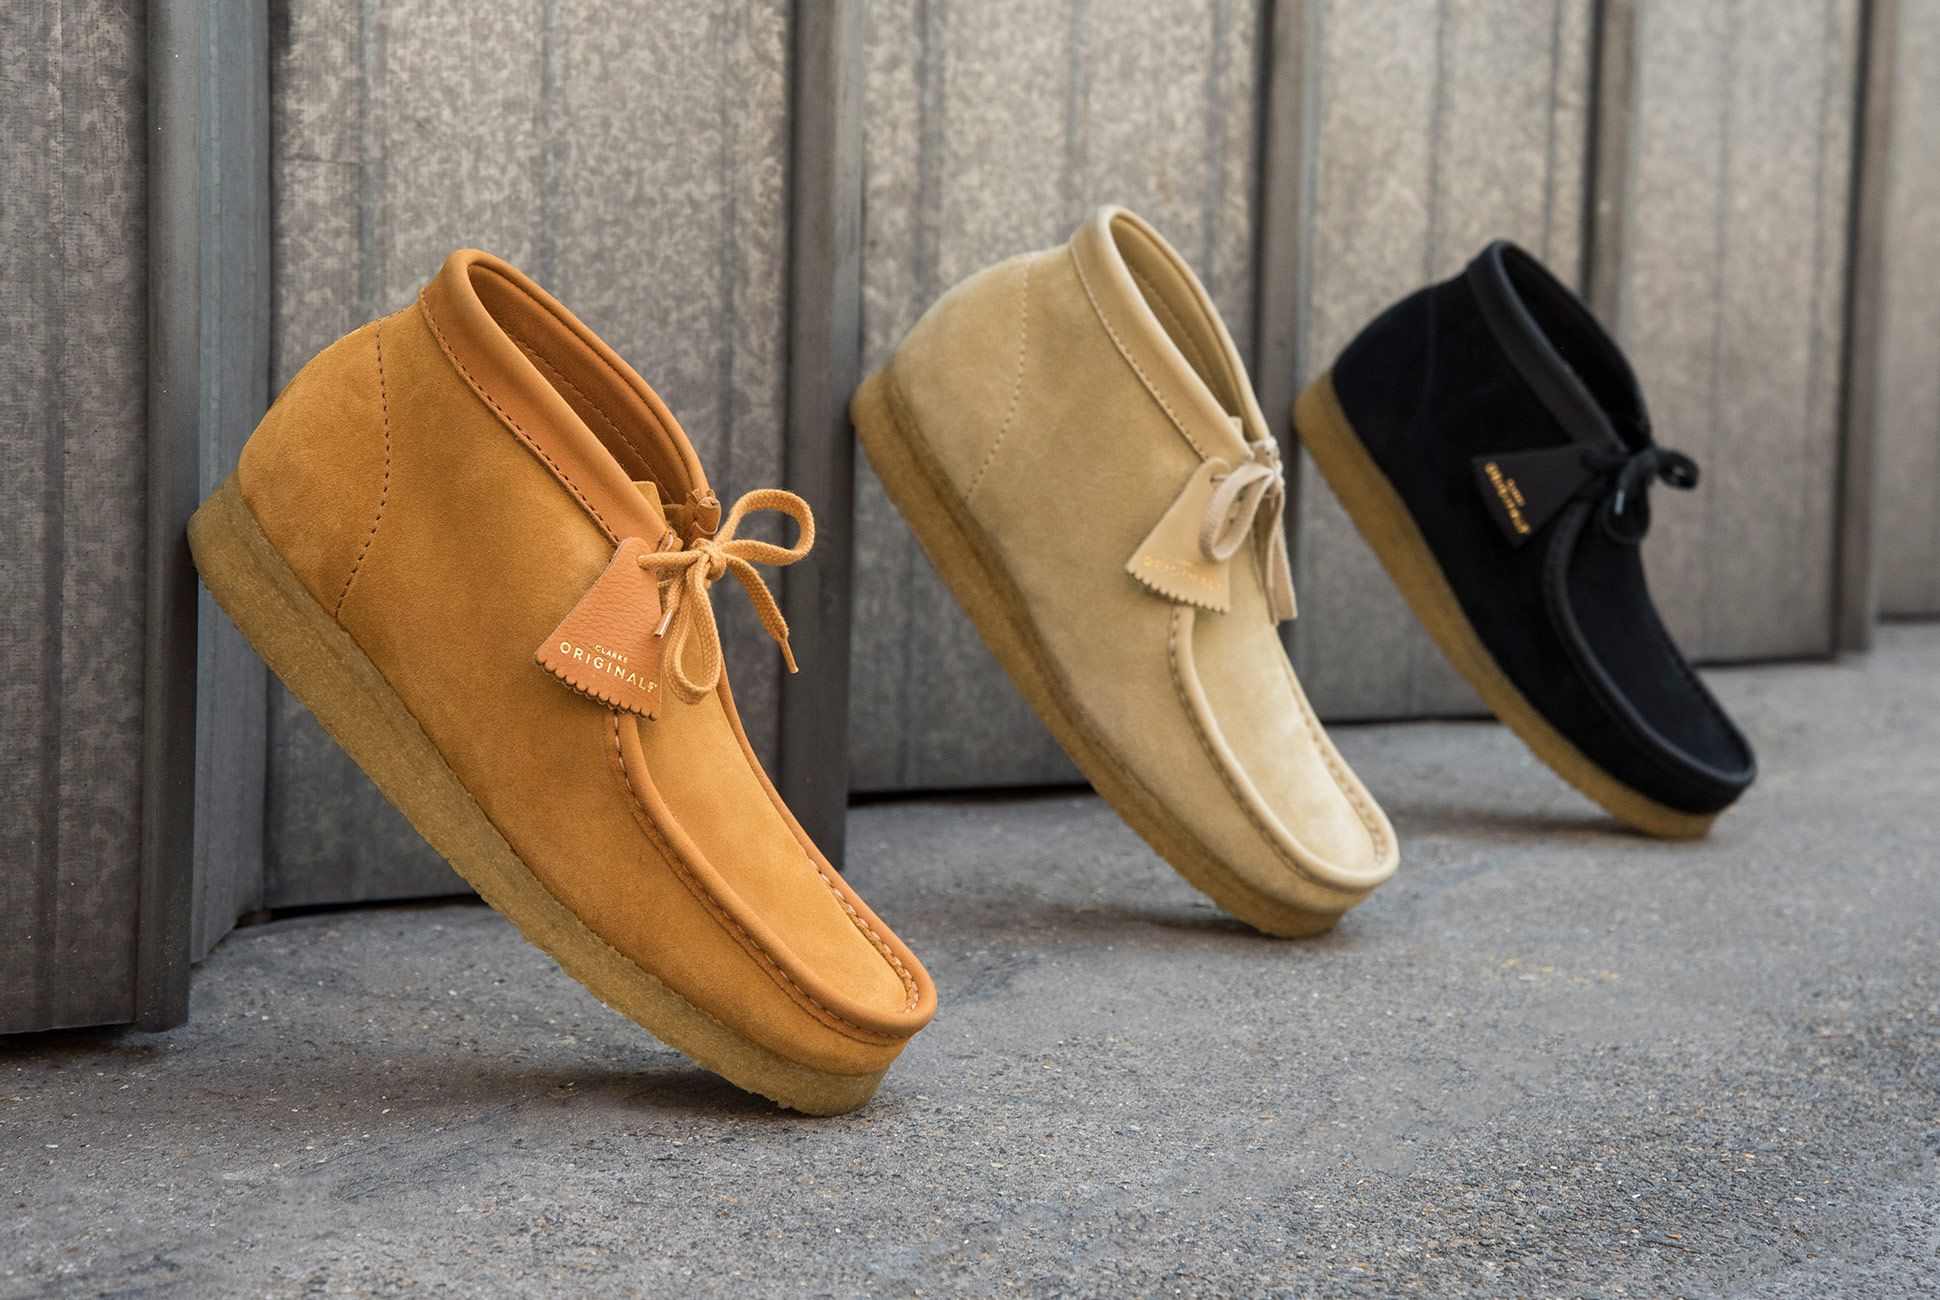 clarks wallabees limited edition